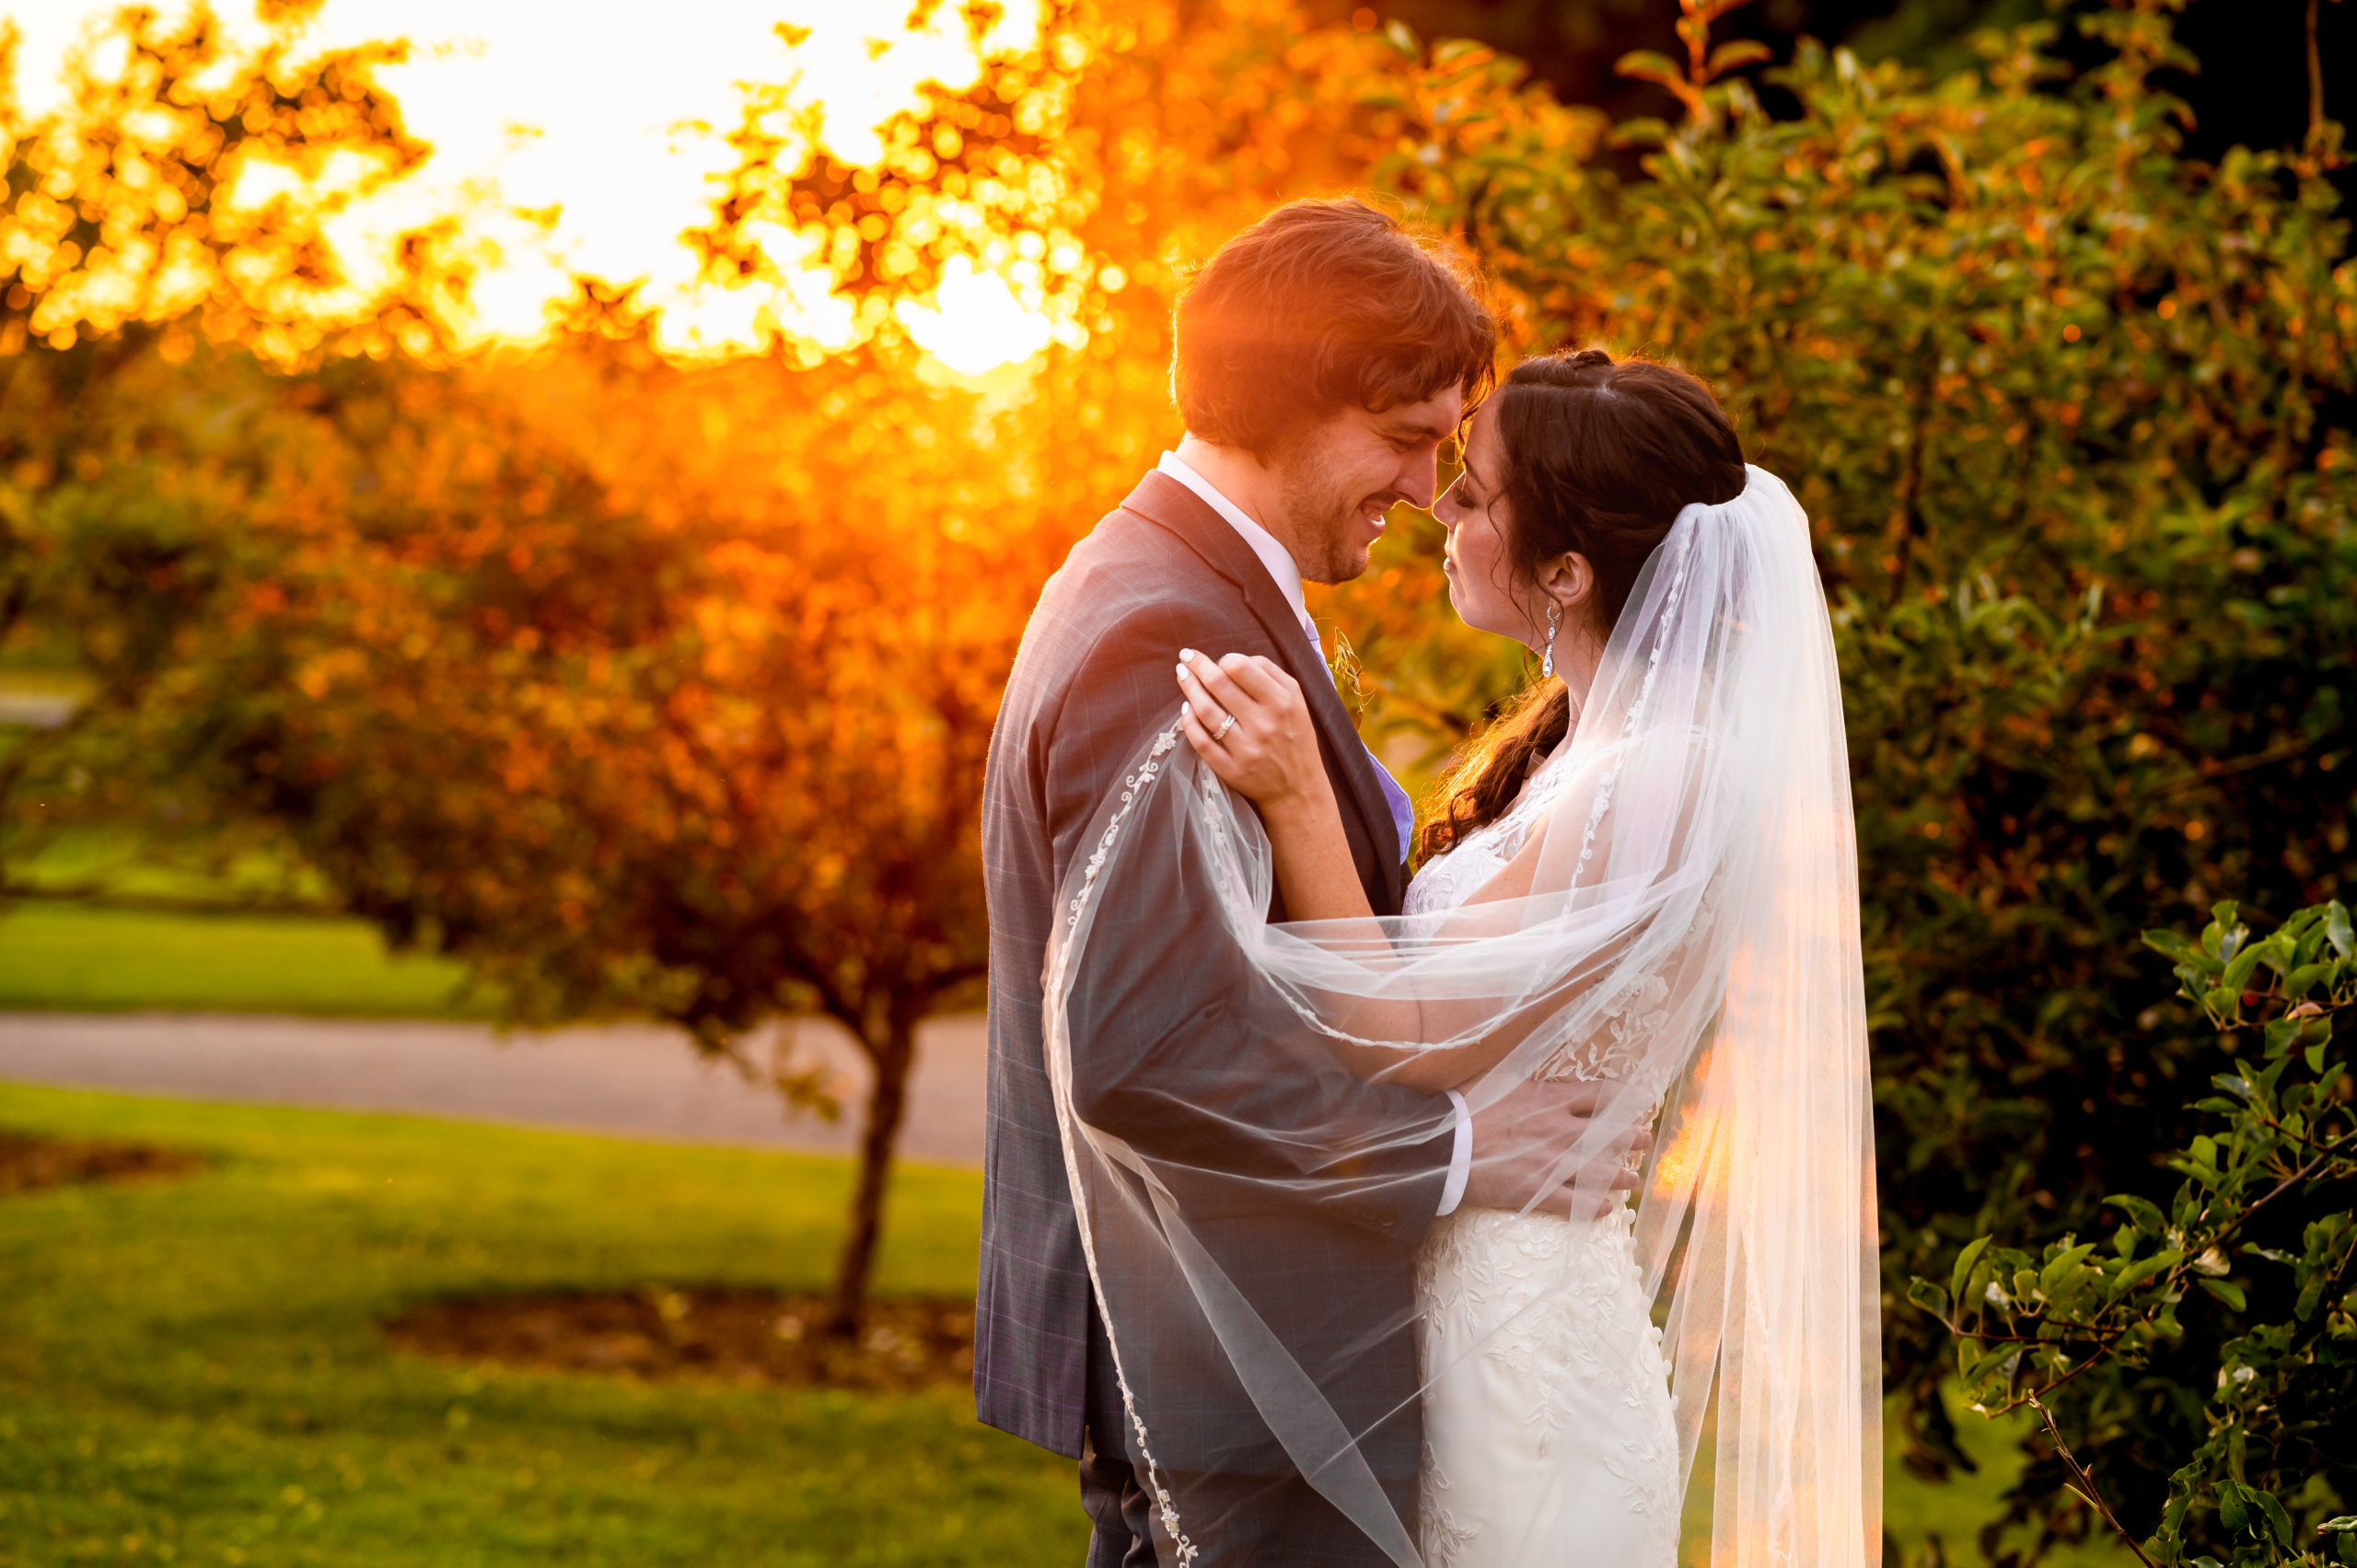 Sunset wedding photo at Fernbrook Farms in Chesterfield NJ